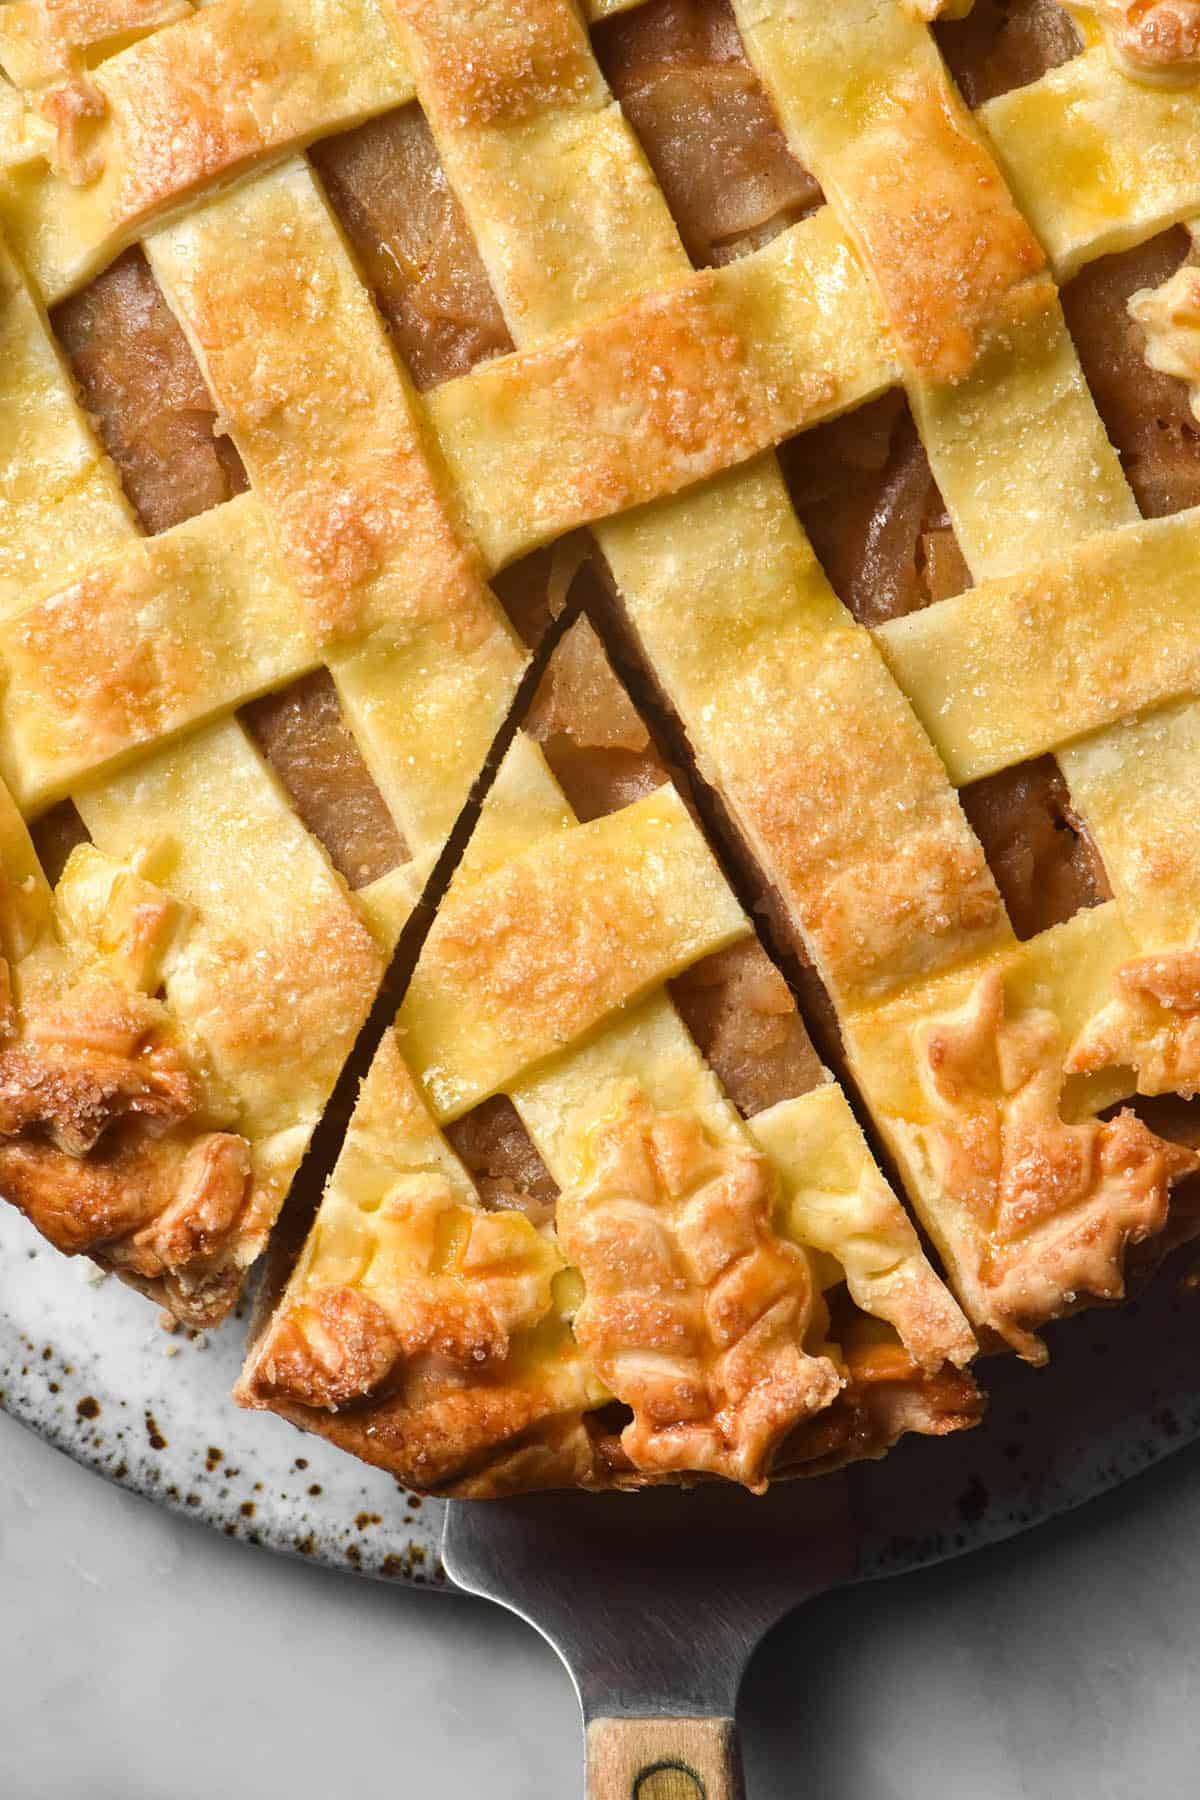 An aerial close up image of a gluten free low FODMAP apple pie. The pie has a lattice top with pastry leaf decor around the edges. It sits on a white ceramic plate atop a white marble table. The pie has been sliced and a cake server with a wooden handle sits underneath the slice.